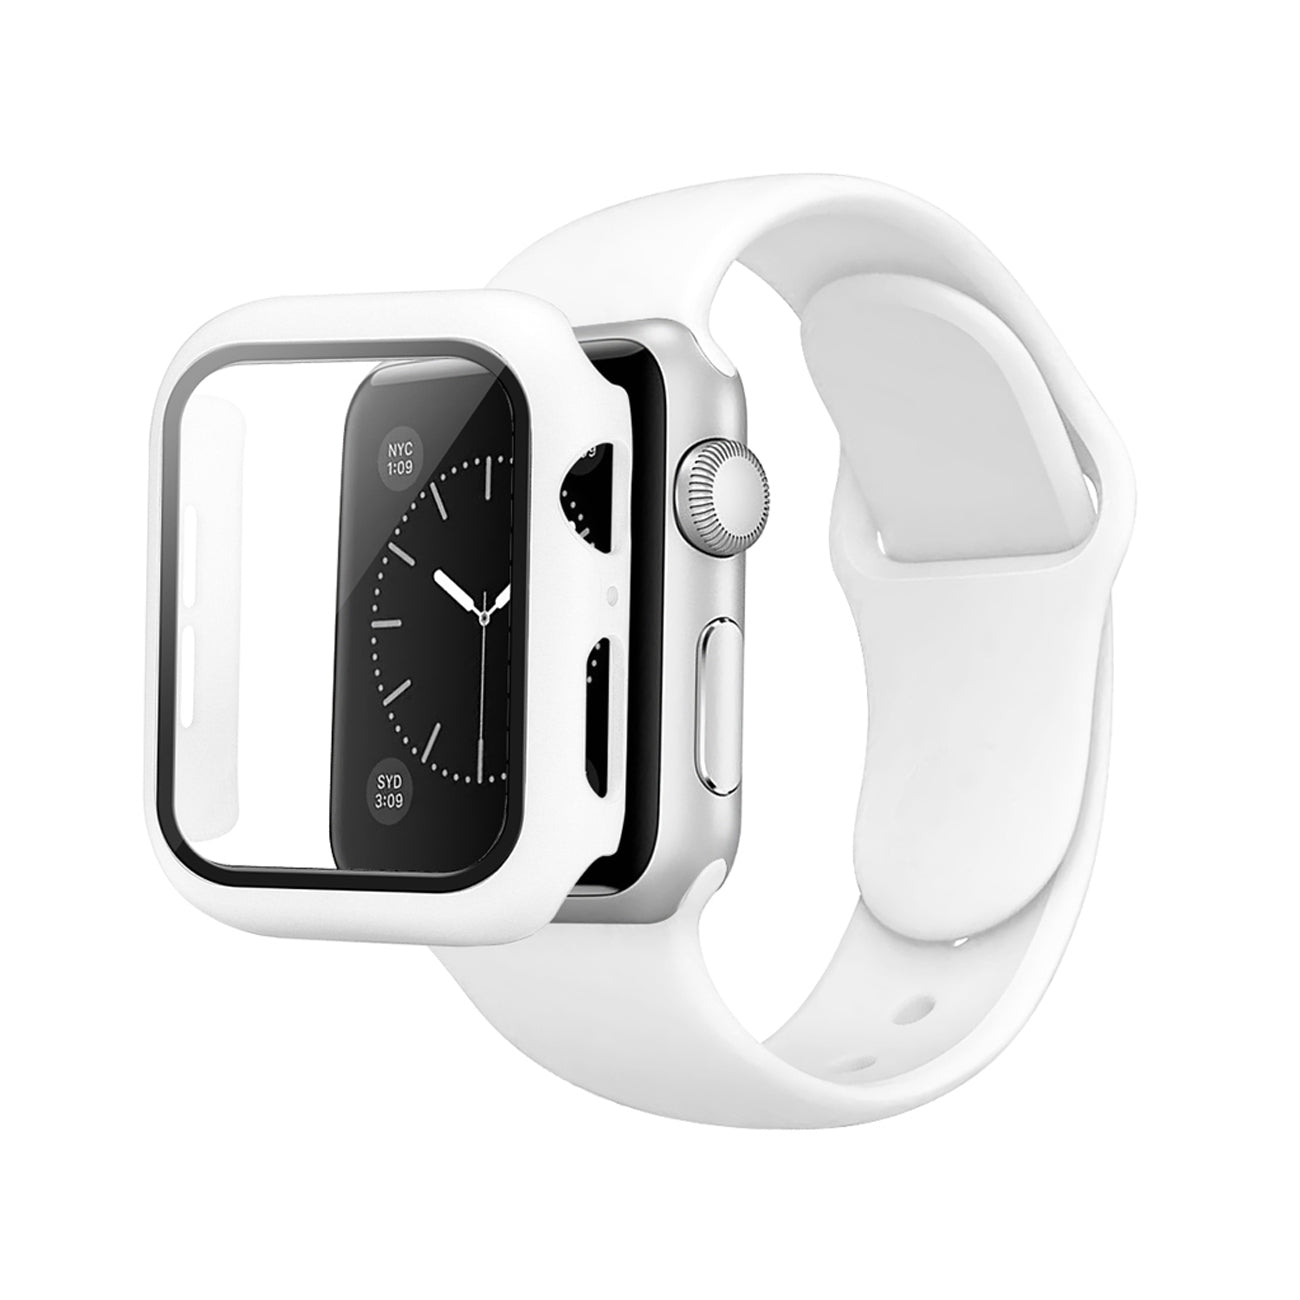 Watch Case PC With Glass Screen Protector, Silicone Watch Band Apple Watch 40mm White Color